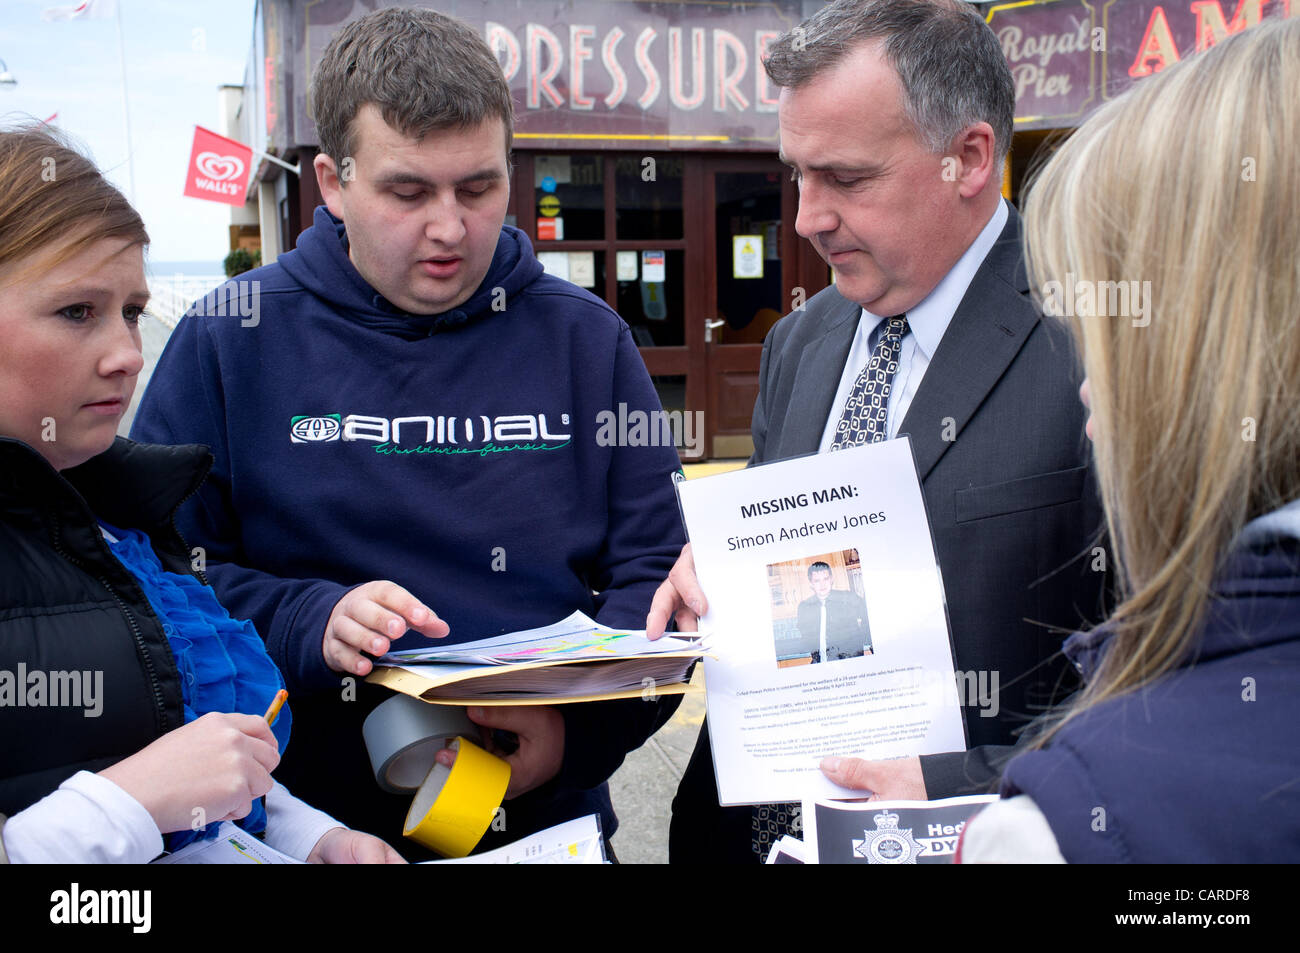 Aberystwyth Wales UK,  Friday 13 April 2012:  Friends and relatives of missing 24 year old man Simon Jones talk to local Liberal Democrat M.P. MARK WILLIAMS before distributing posters and leaflets seeking help and information on his whereabouts. Credit Line : © keith morris / Alamy Live News. Stock Photo